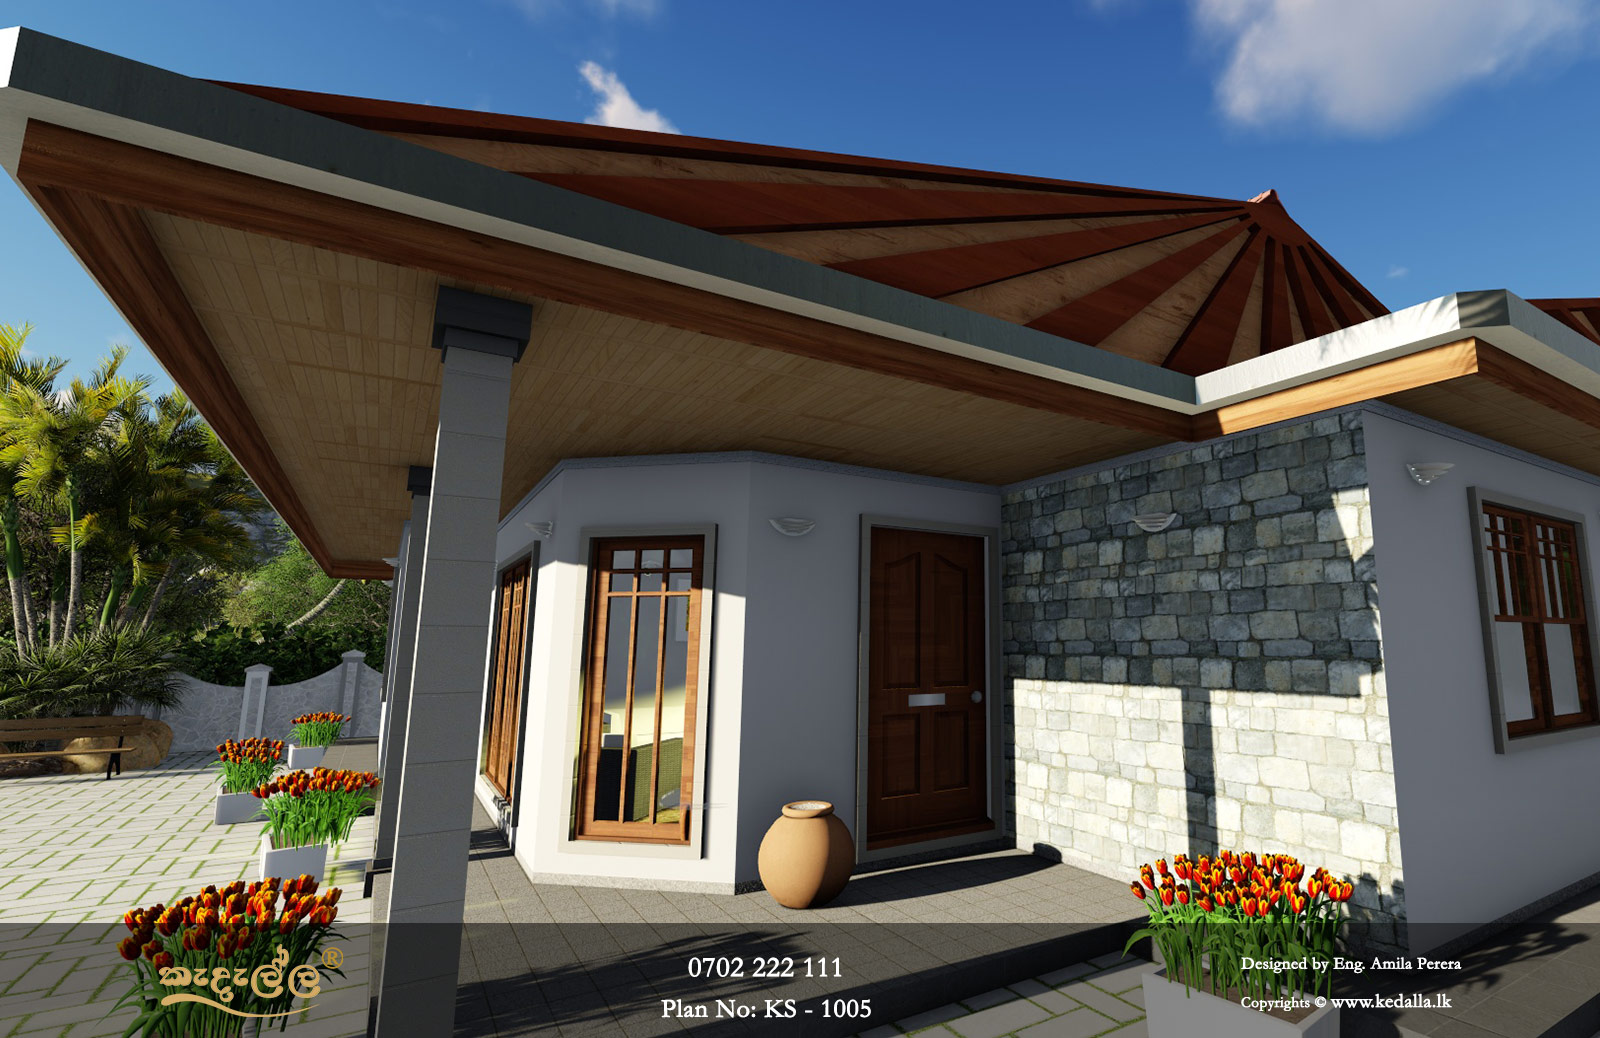 A single story traditional house design that cuts down on wasted space and maximizes comfort and ease of living